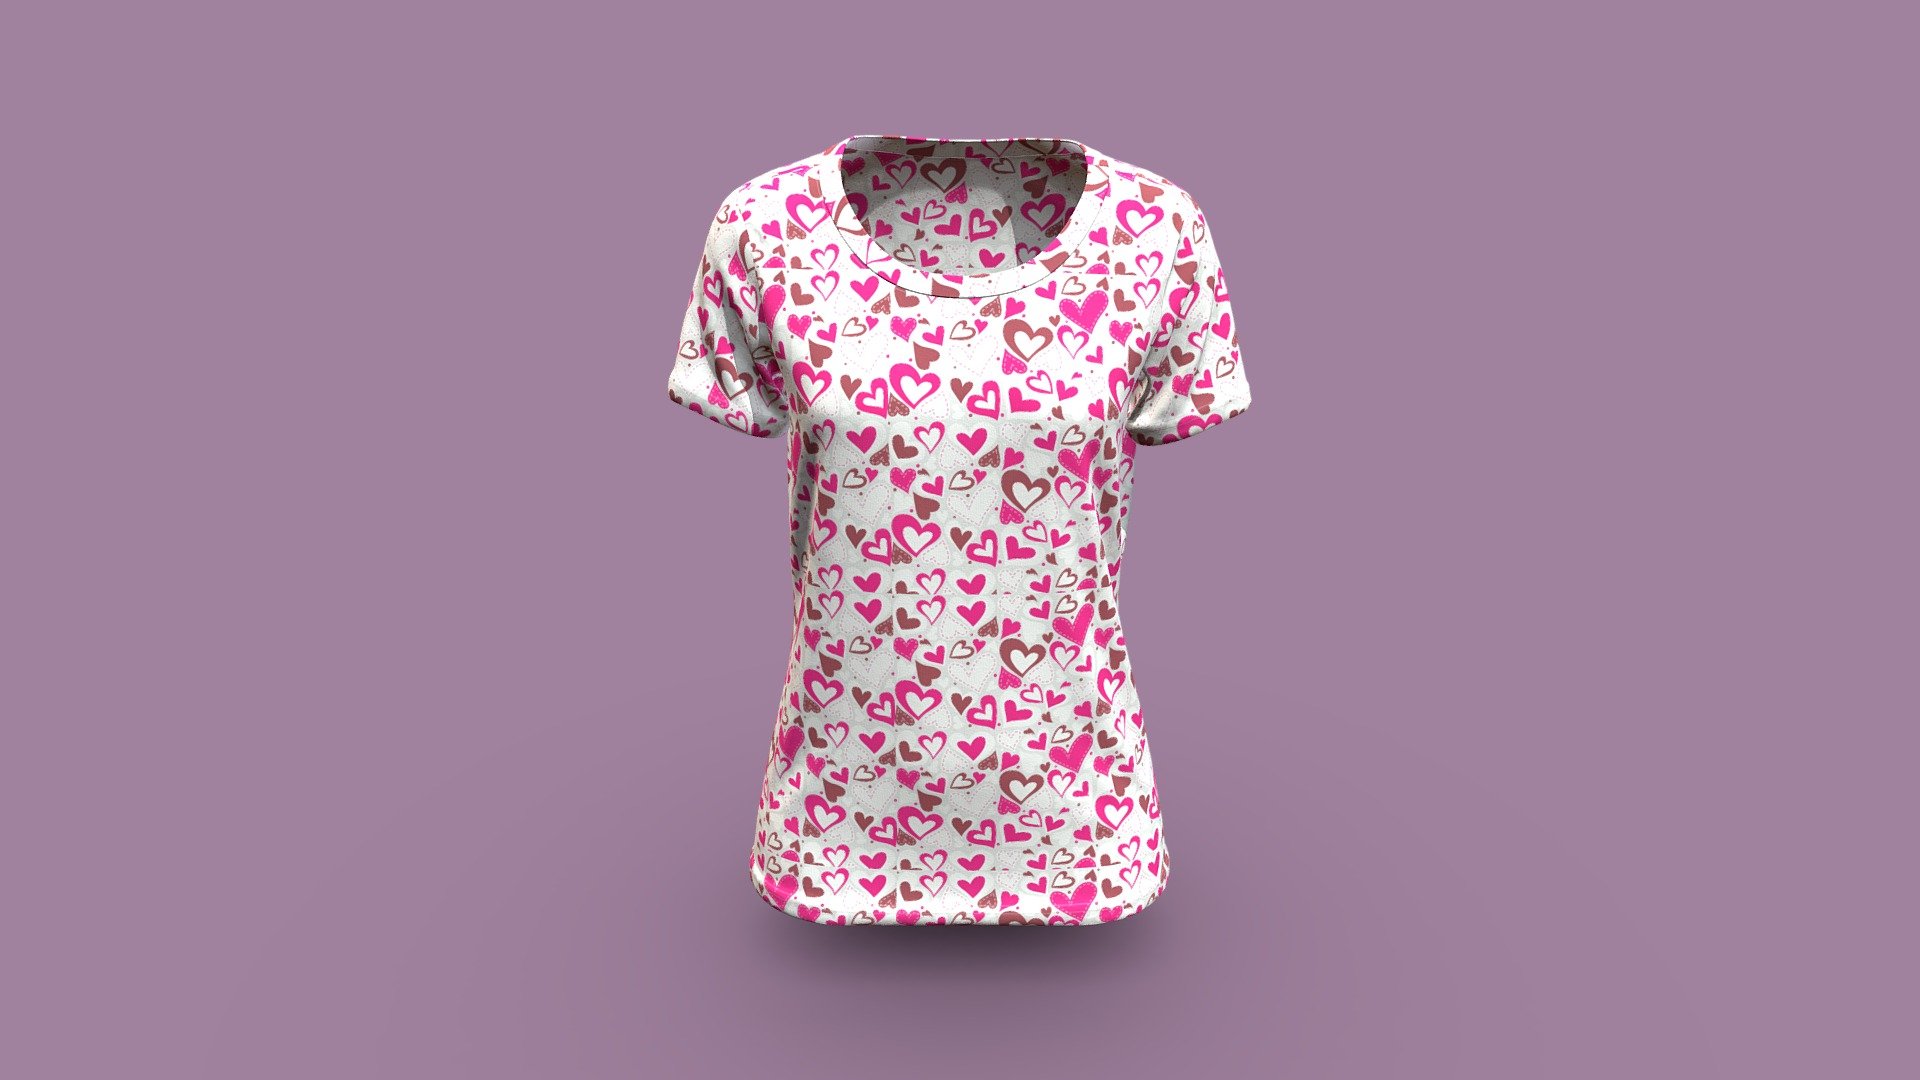 Cloth Title = Boatneck Short Sleeve T-shirt Women 

SKU = DG100149 

Category = Women 

Product Type = T-Shirt 

Cloth Length = Regular 

Body Fit = Regular Fit 

Occasion = Casual 
 
Sleeve Style = Set In Sleeve 


Our Services:

3D Apparel Design.

OBJ,FBX,GLTF Making with High/Low Poly.

Fabric Digitalization.

Mockup making.

3D Teck Pack.

Pattern Making.

2D Illustration.

Cloth Animation and 360 Spin Video.


Contact us:- 

Email: info@digitalfashionwear.com 

Website: https://digitalfashionwear.com 


We designed all the types of cloth specially focused on product visualization, e-commerce, fitting, and production. 

We will design: 

T-shirts 

Polo shirts 

Hoodies 

Sweatshirt 

Jackets 

Shirts 

TankTops 

Trousers 

Bras 

Underwear 

Blazer 

Aprons 

Leggings 

and All Fashion items. 





Our goal is to make sure what we provide you, meets your demand 3d model